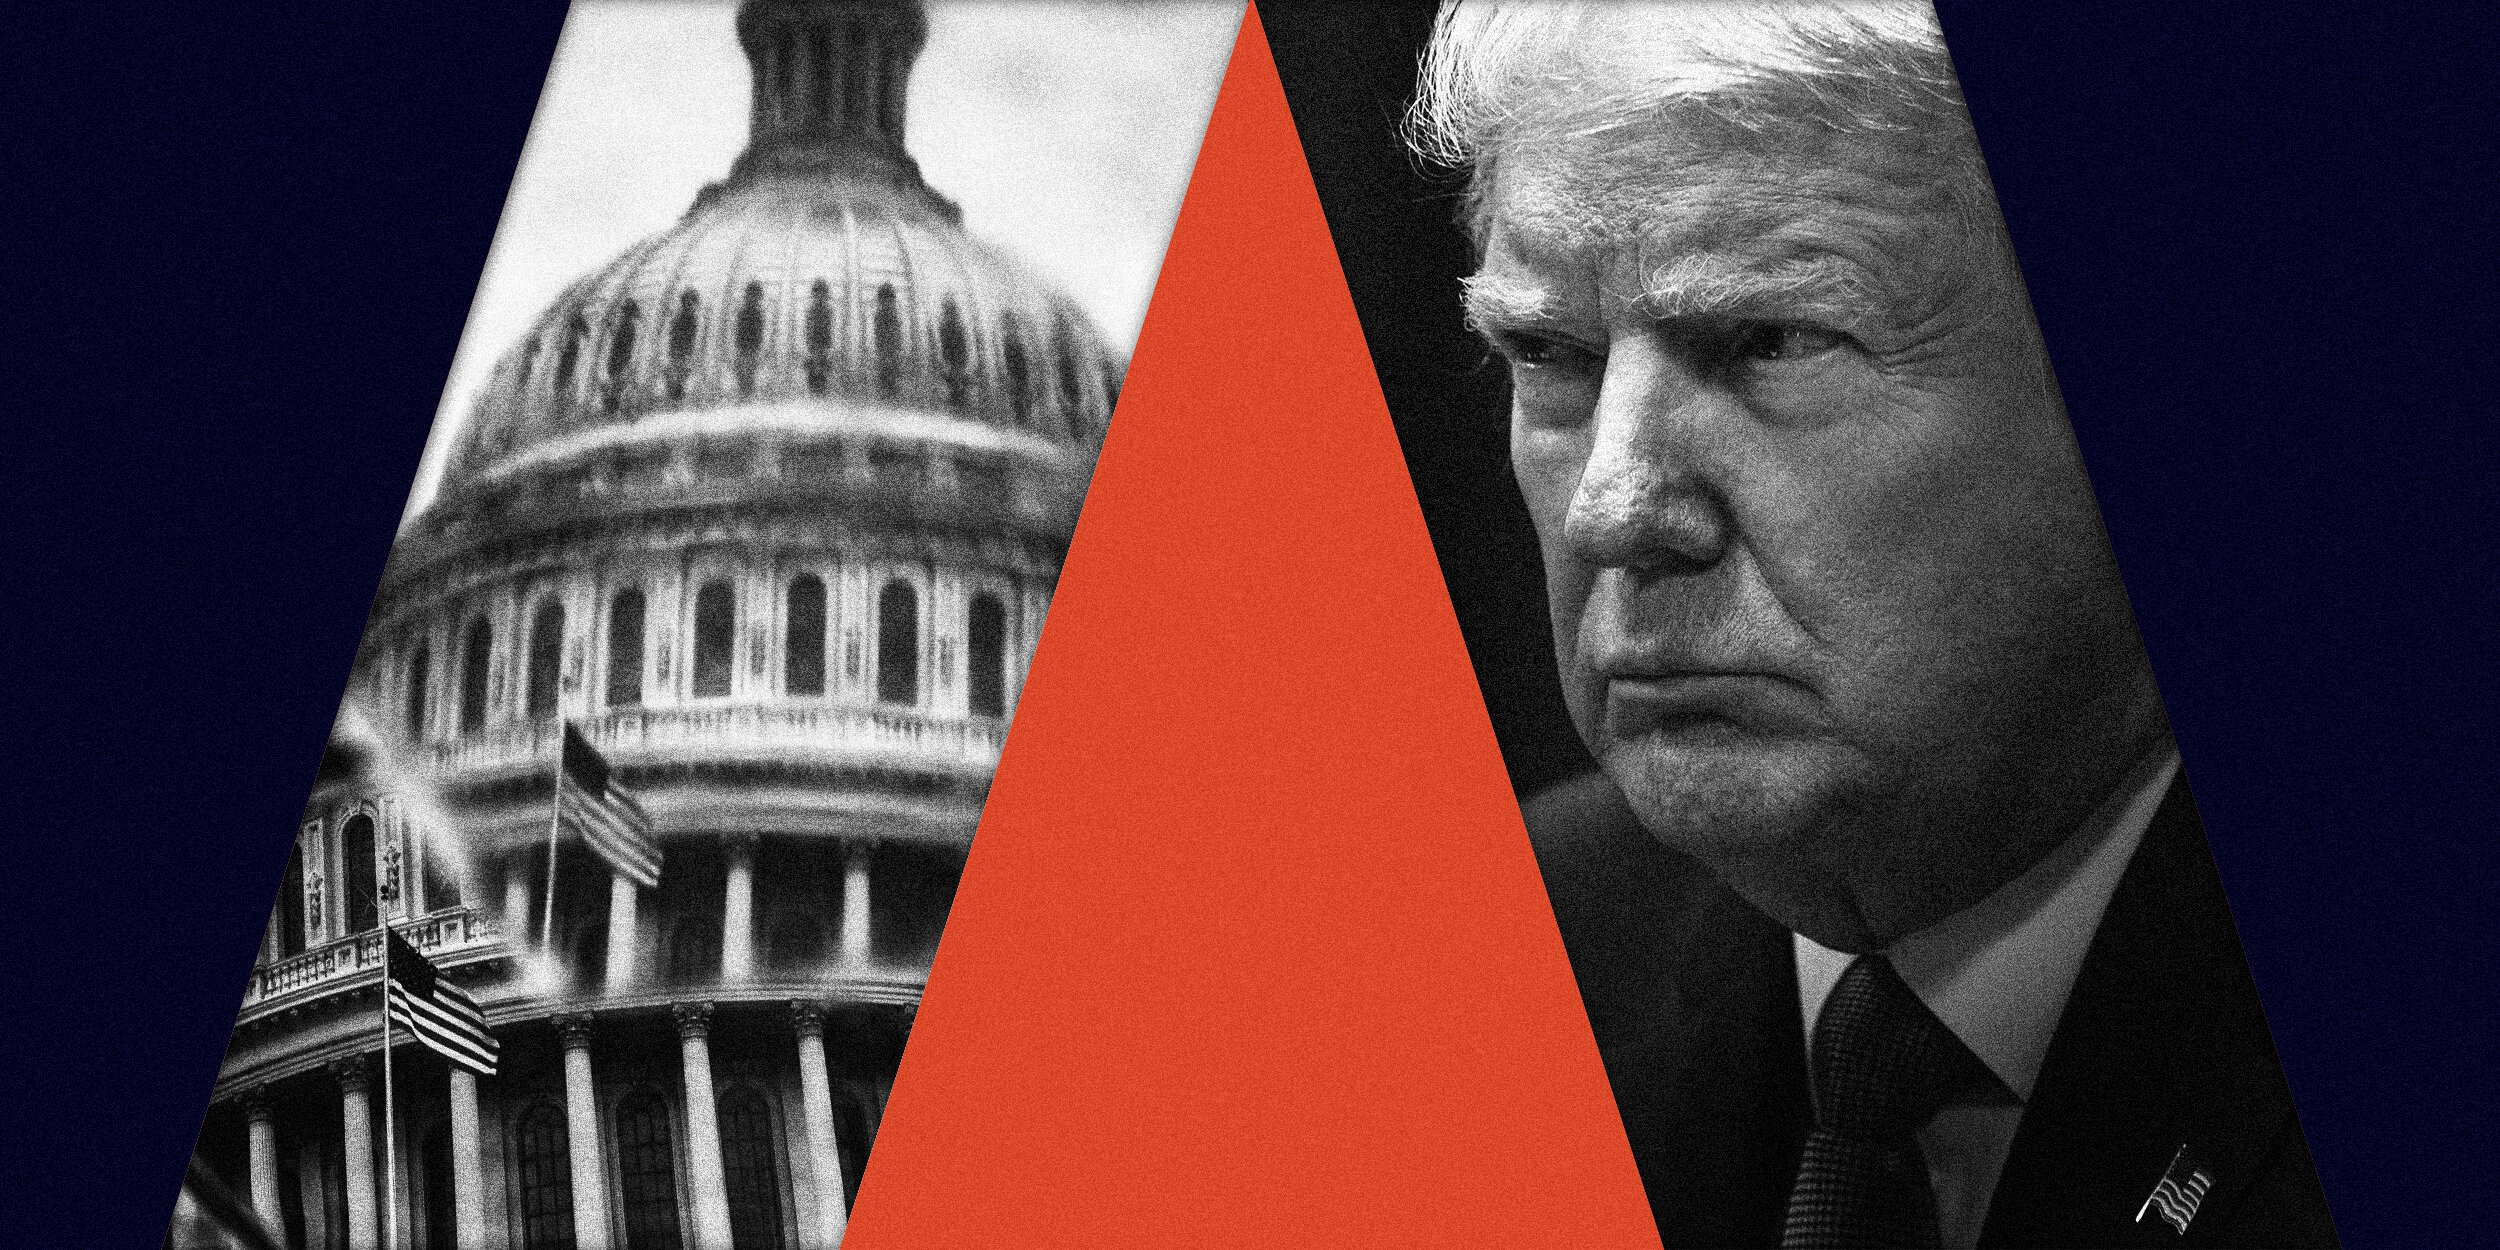   Trump impeached by the House for abuse of power, obstruction of Congress   AD:  Kara Haupt  